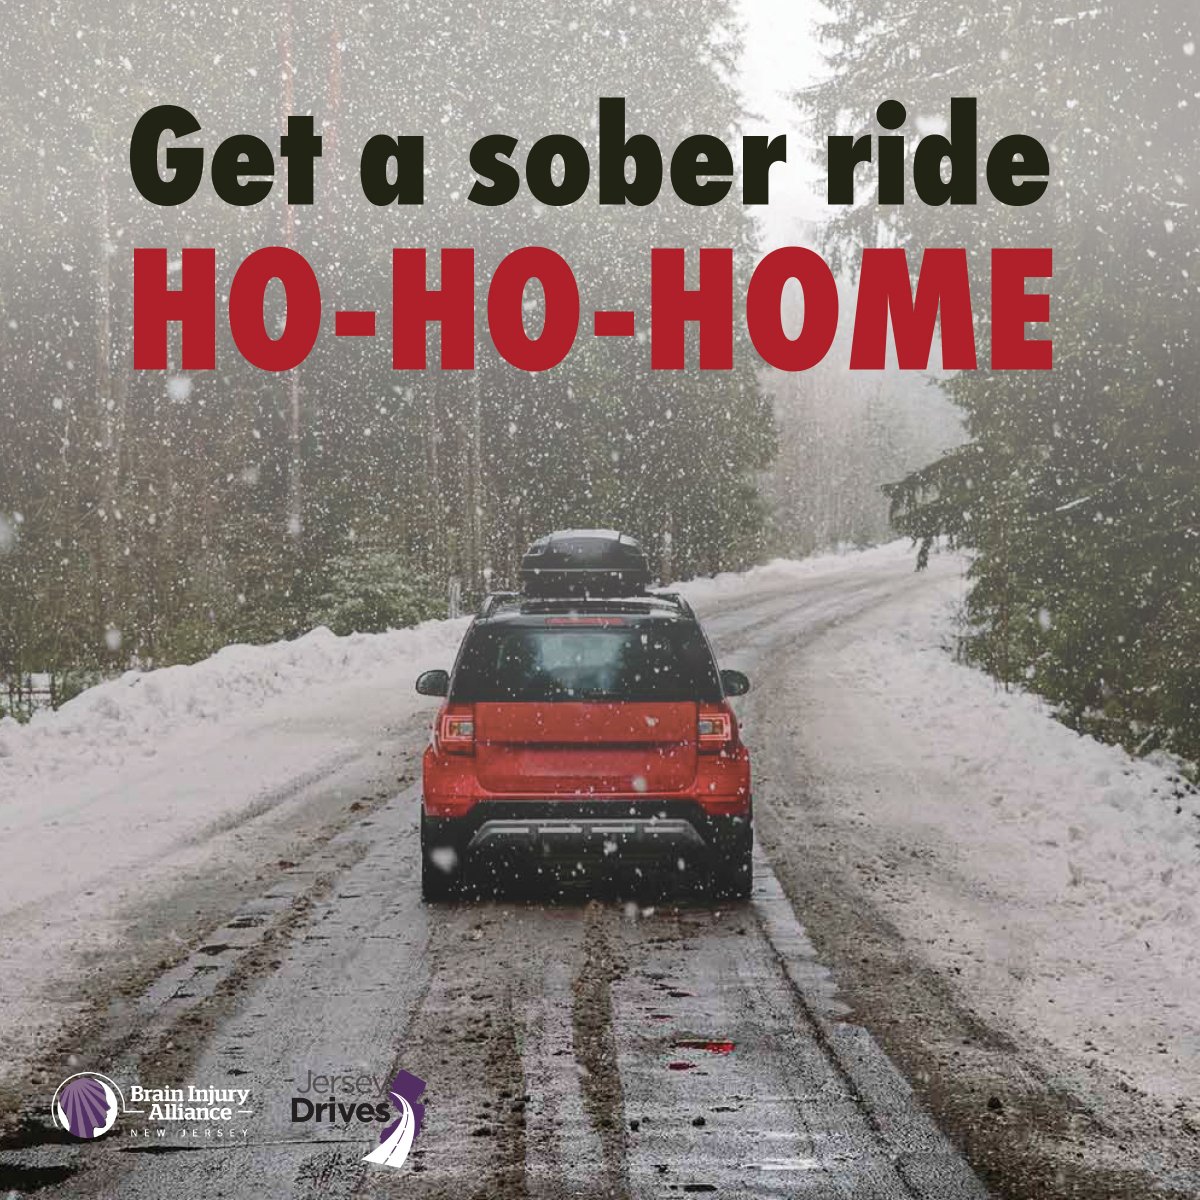 Courtesy of the Brain Injury Alliance of New Jersey & New Jersey Pedestrian and Bicyclist Safety Coalition:

This holiday season, we want gifts. A DUI is not one of them. Be safe this holiday season

#BeSmart #njsaferoads #happyholidays2023